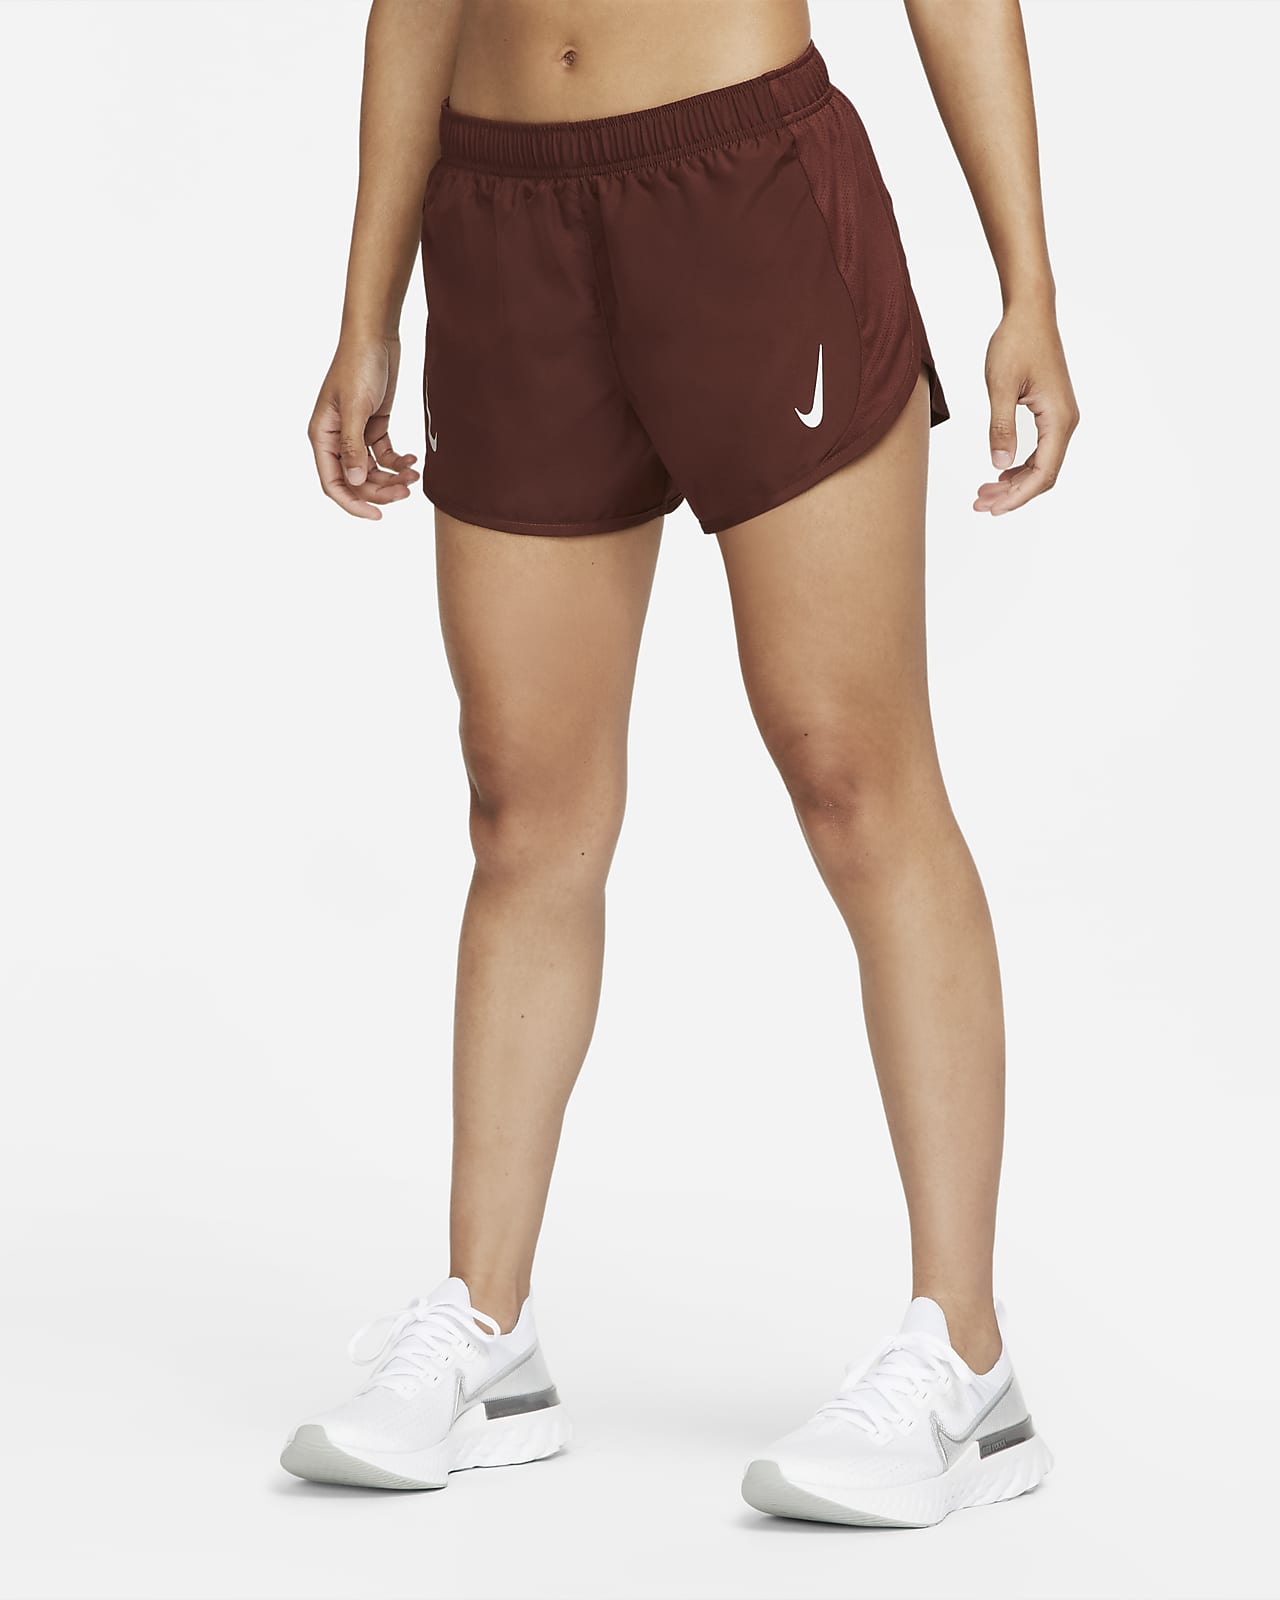 Nike Dri-FIT Tempo Race Hardloopshorts voor dames